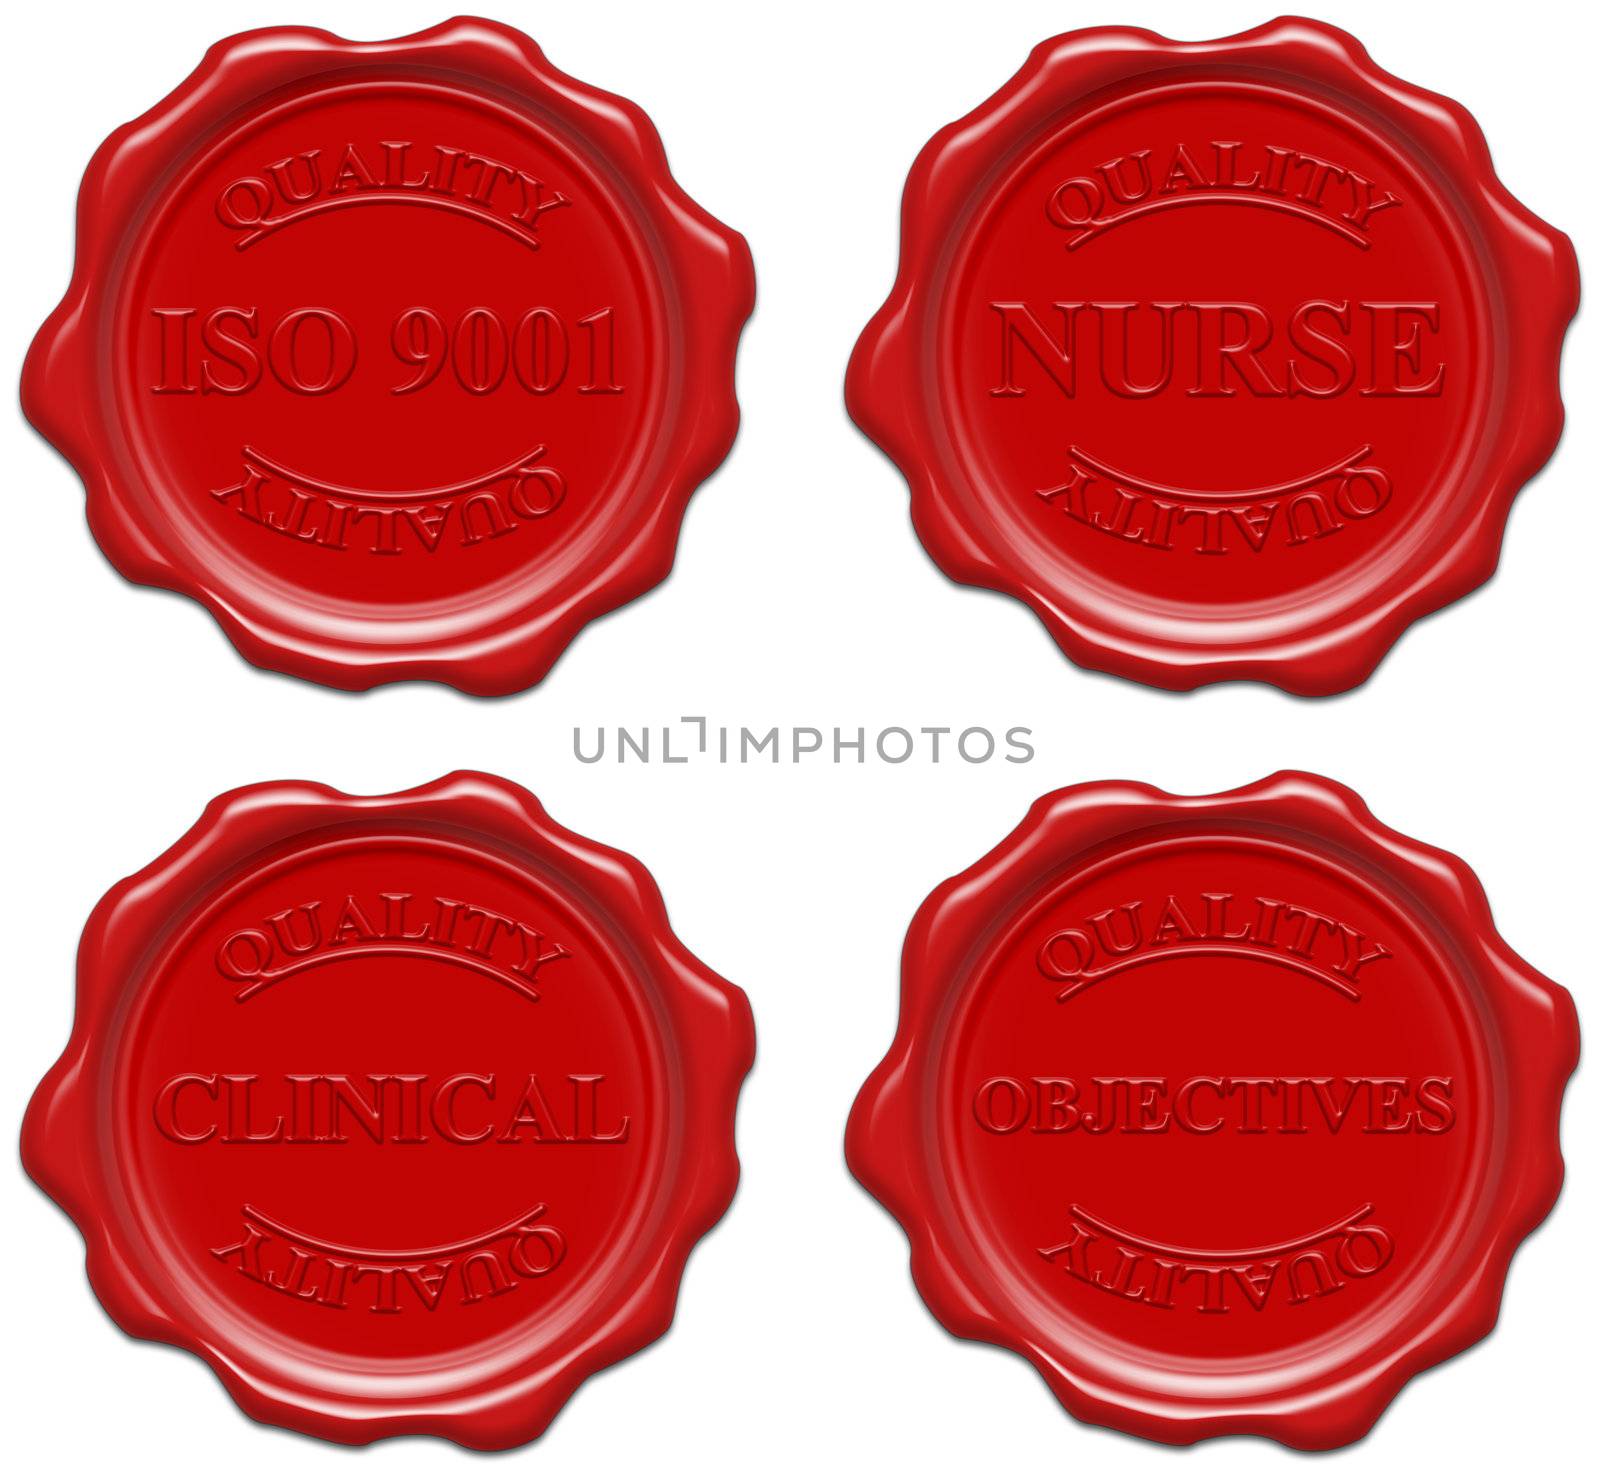 High resolution realistic red wax seal with text : quality, iso 9001, nurse, clinical, objectives